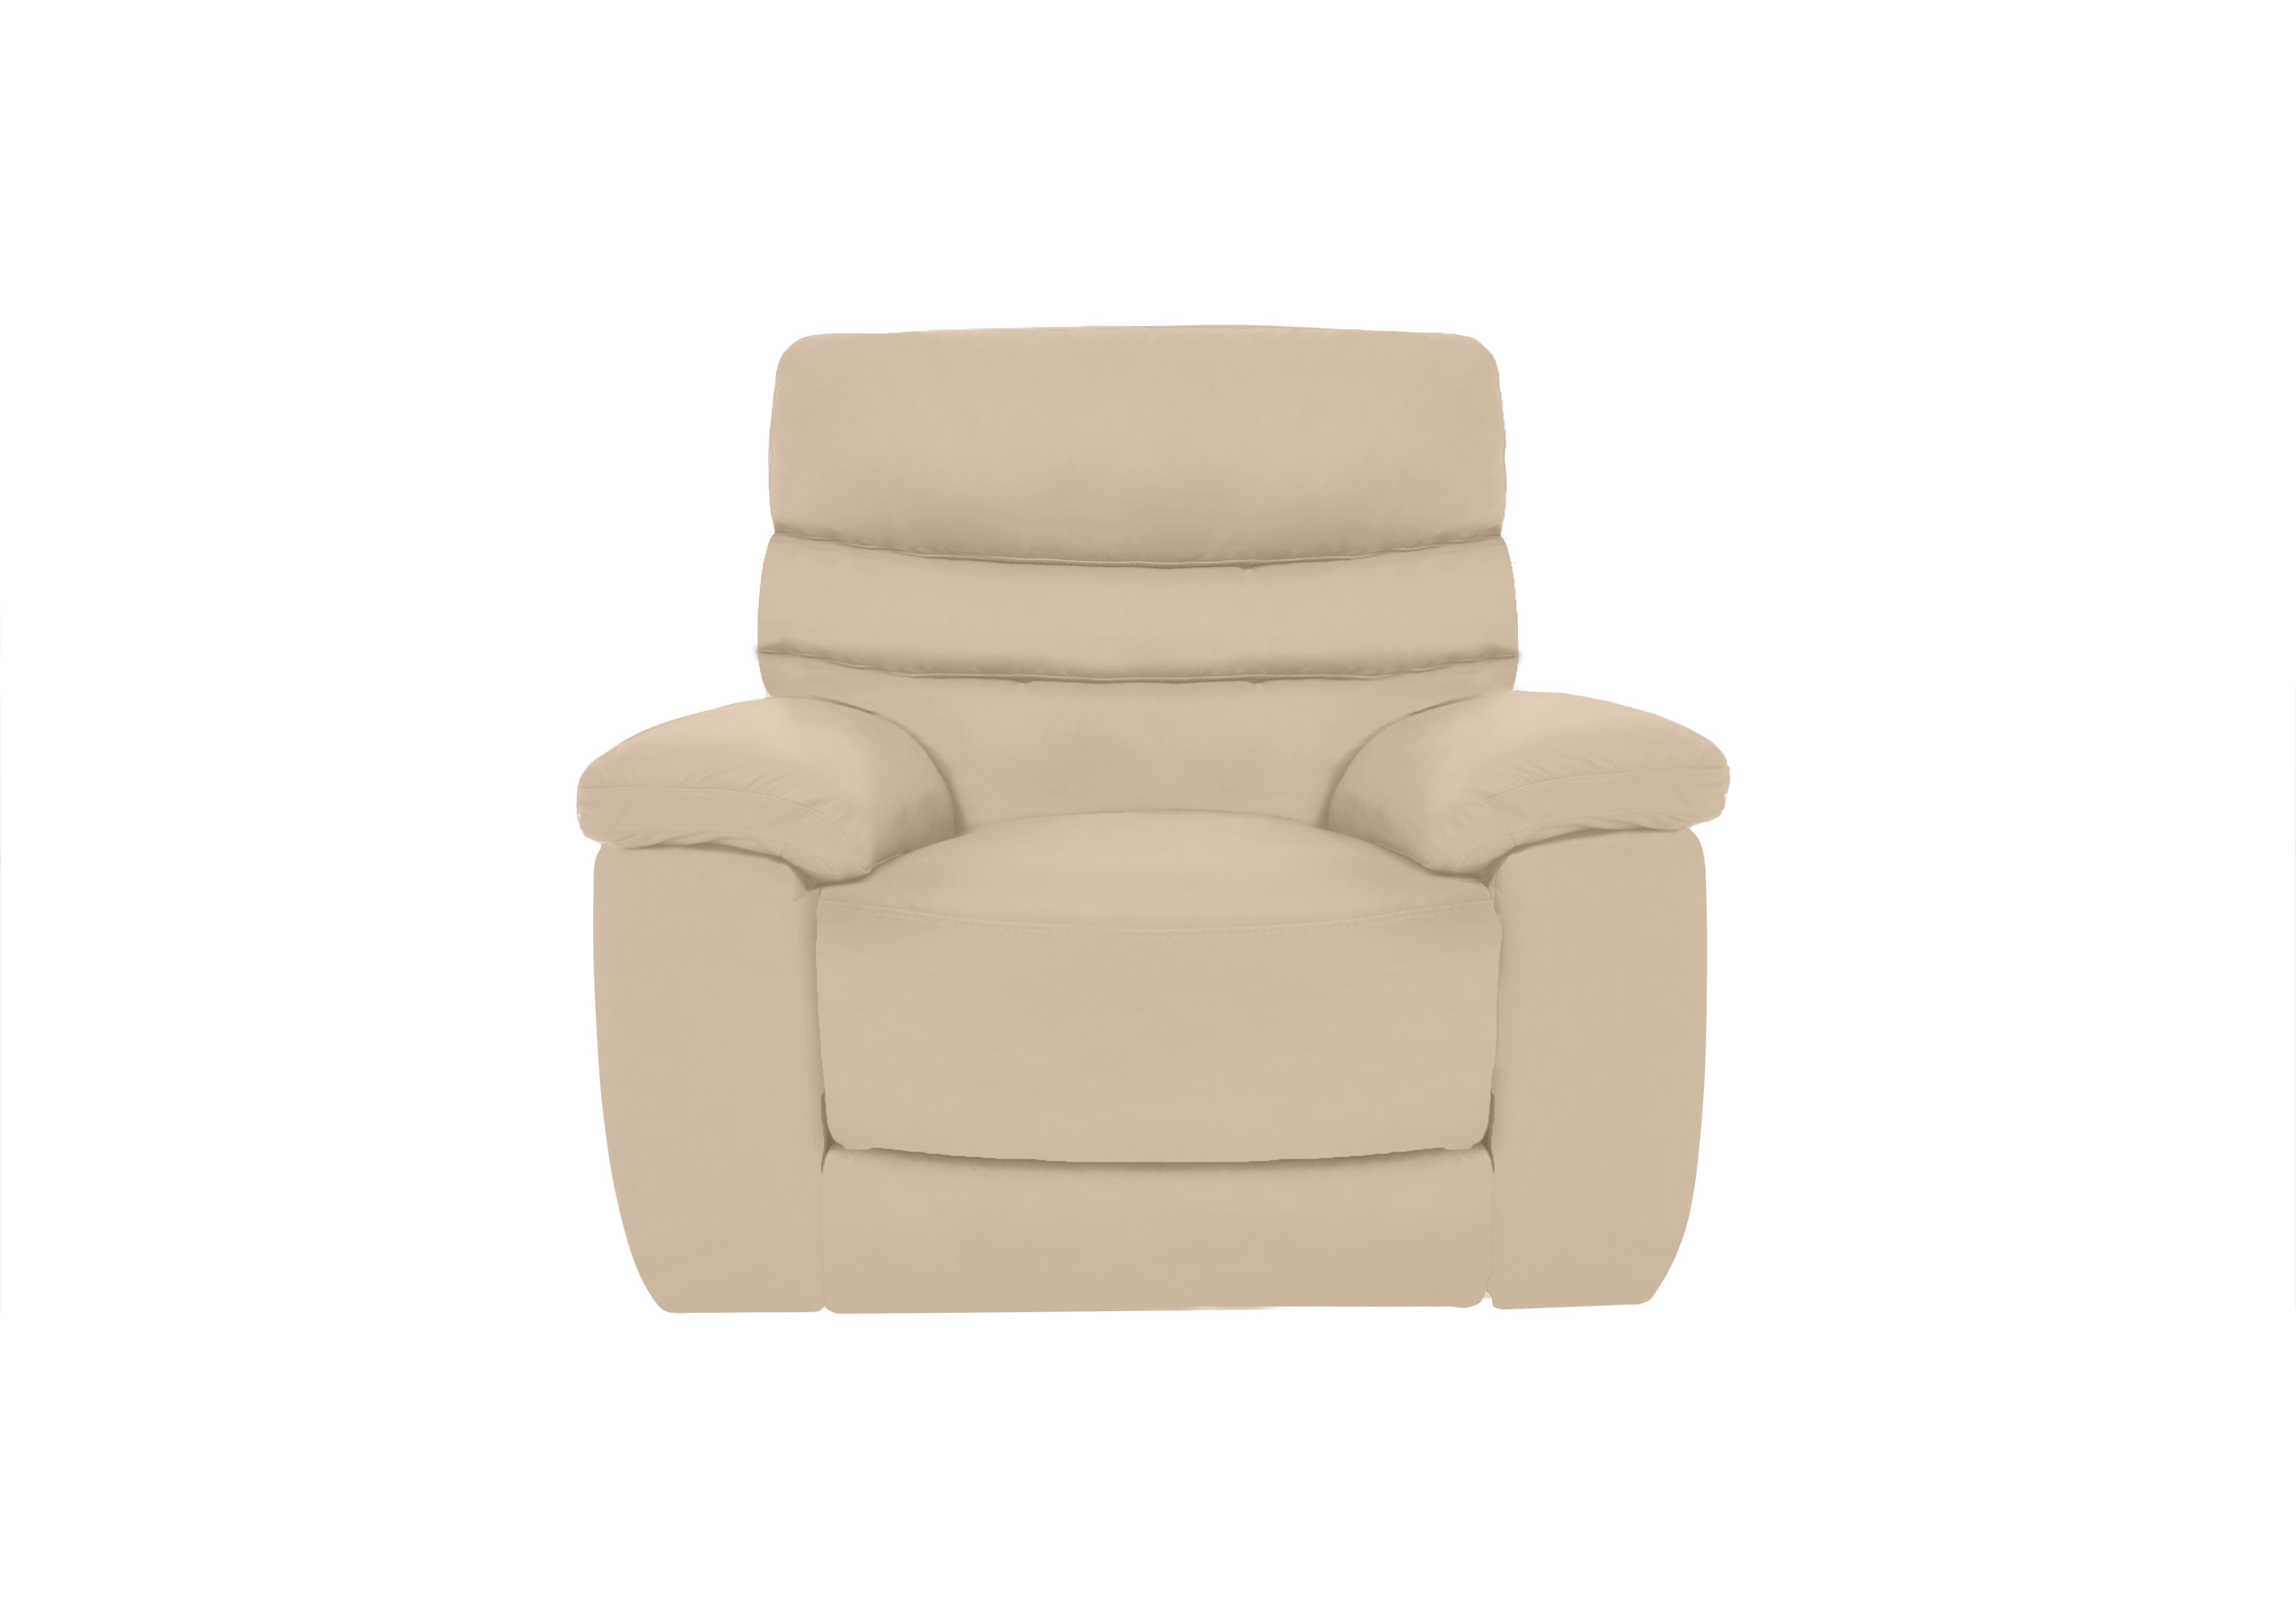 Nimbus Leather Power Recliner Chair with Power Headrest and Power Lumbar in Bx-862c Bisque on Furniture Village